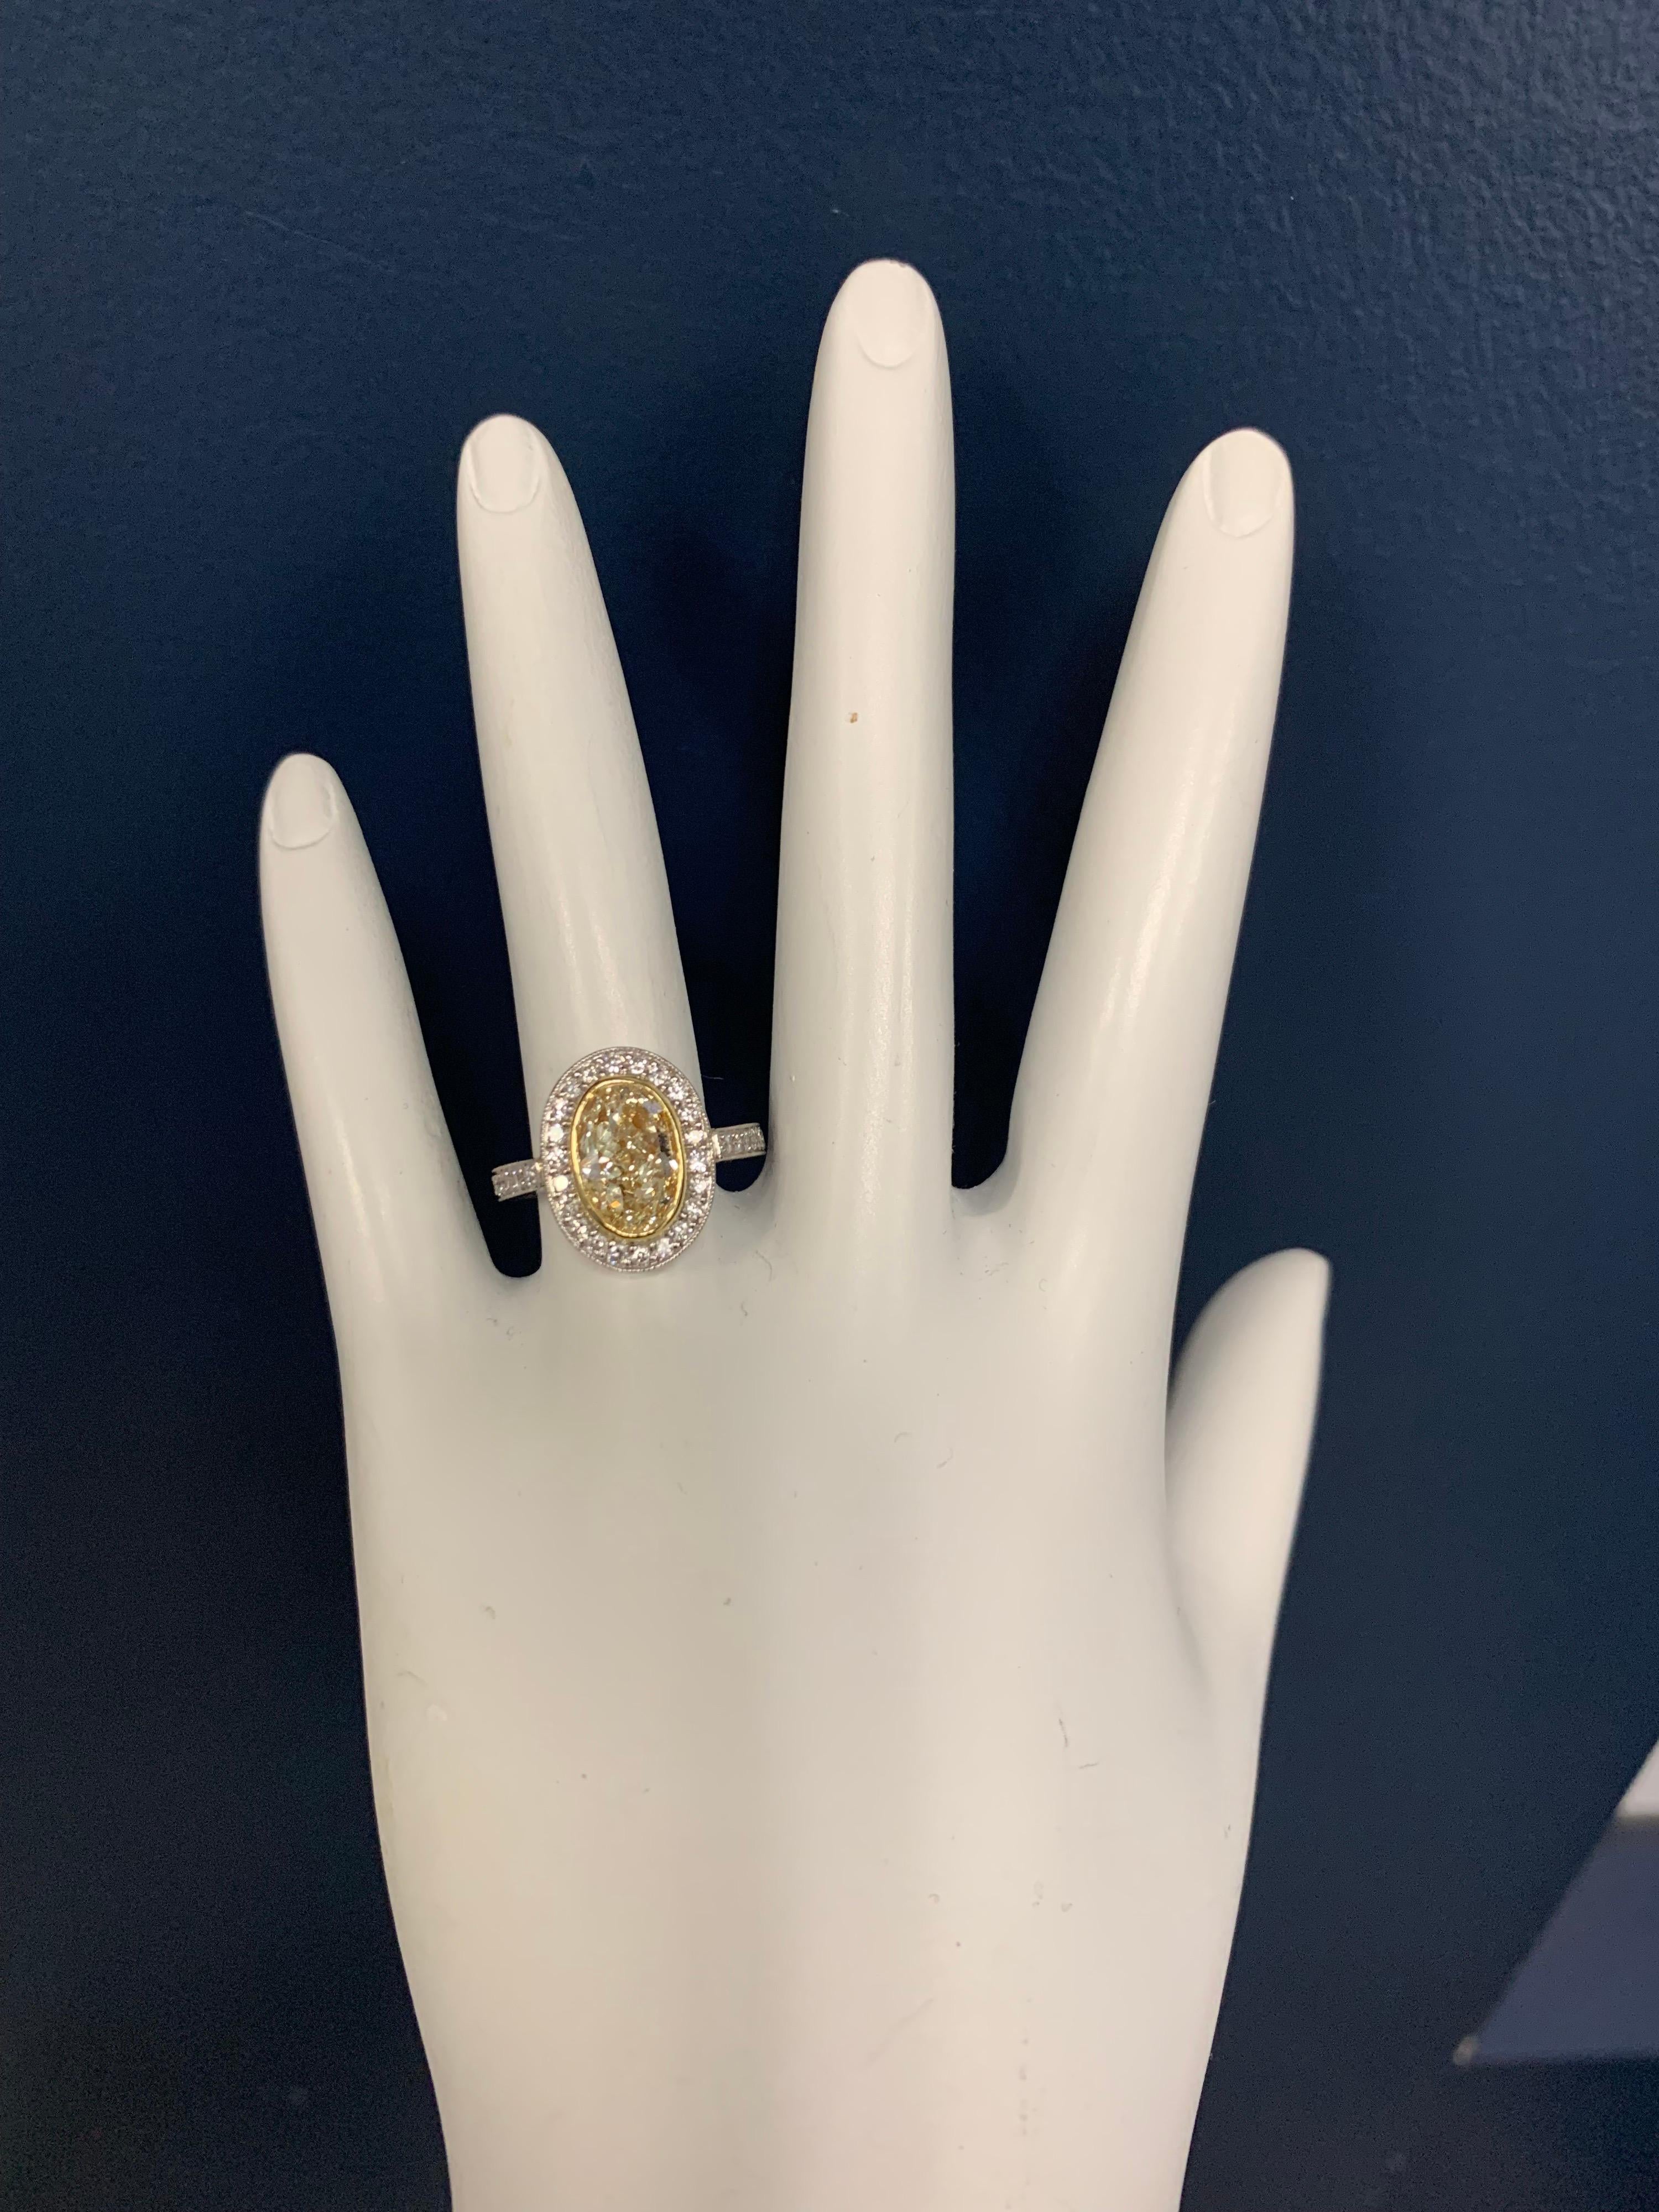 An elongated 2 carat Oval certified by EGL USA as a Light Yellow U-V and a vs2 clarity.  The ring includes 34 Natural Round Brilliant Colorless Diamonds weighing 0.32 carats. 

Total weight 2.32 carat, Ring is a size 6.5. 

